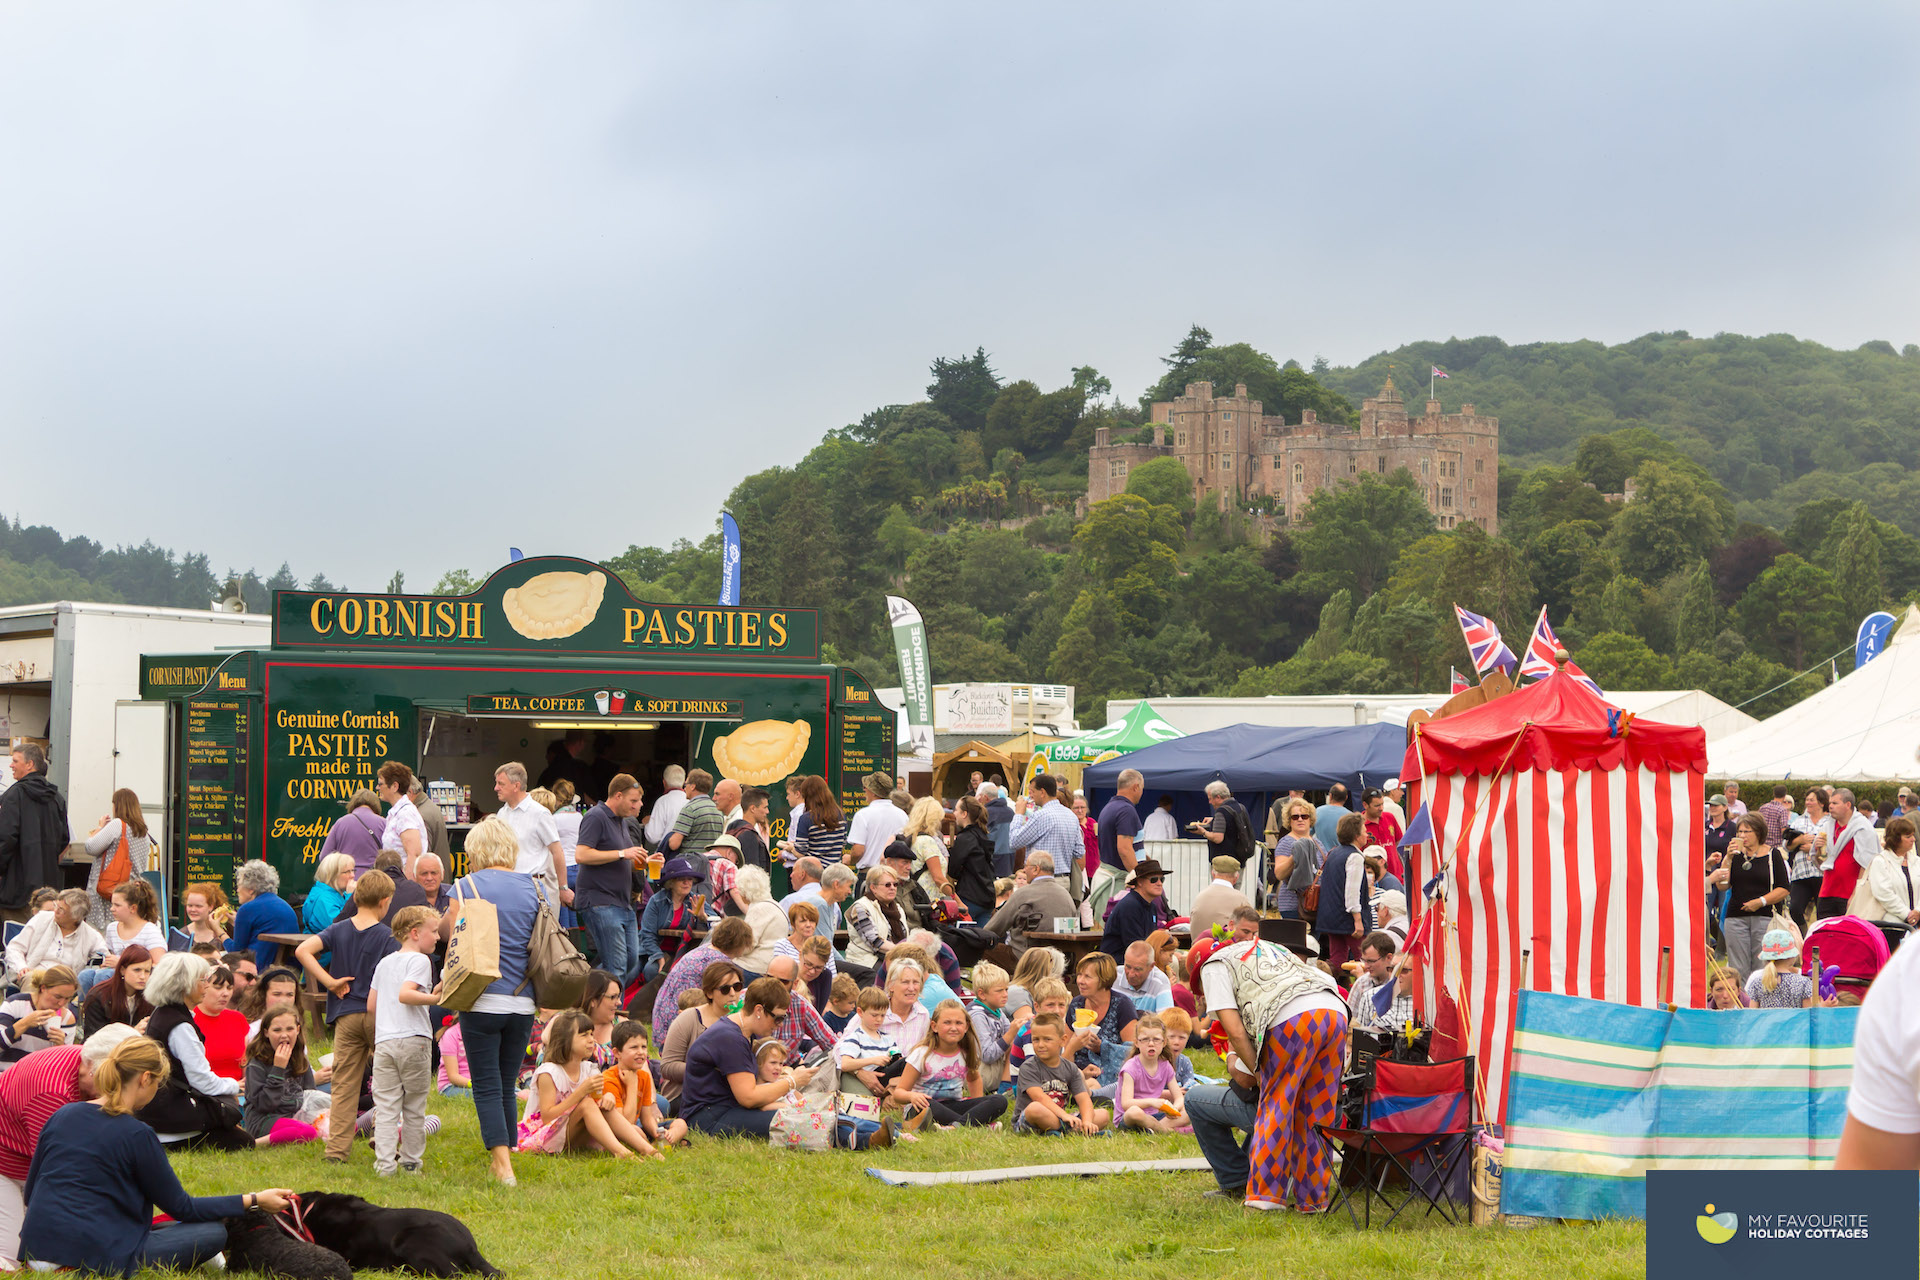 A punch and judy show at a country fair overlooked by Dunster castle